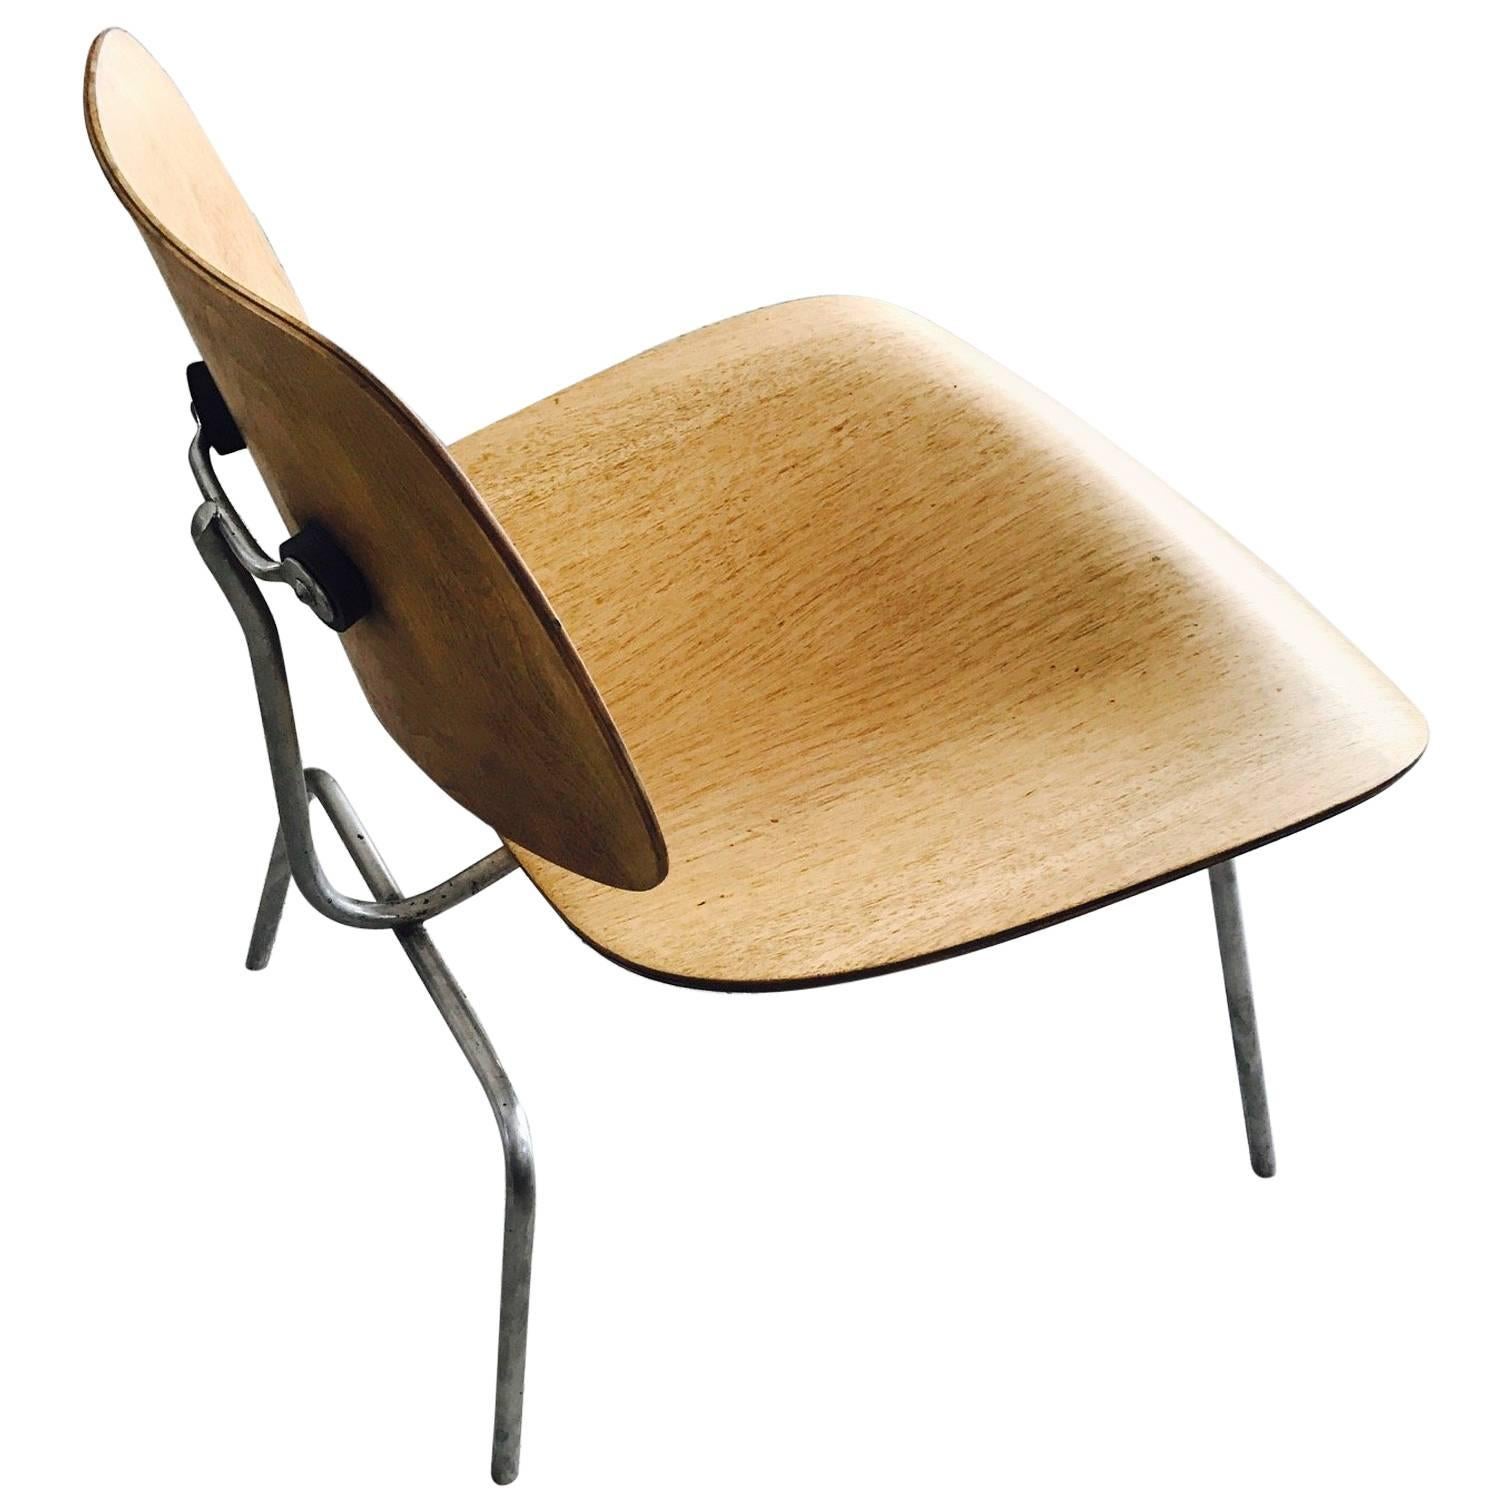 Charles Eames LCM Iconic Chair for Herman Miller